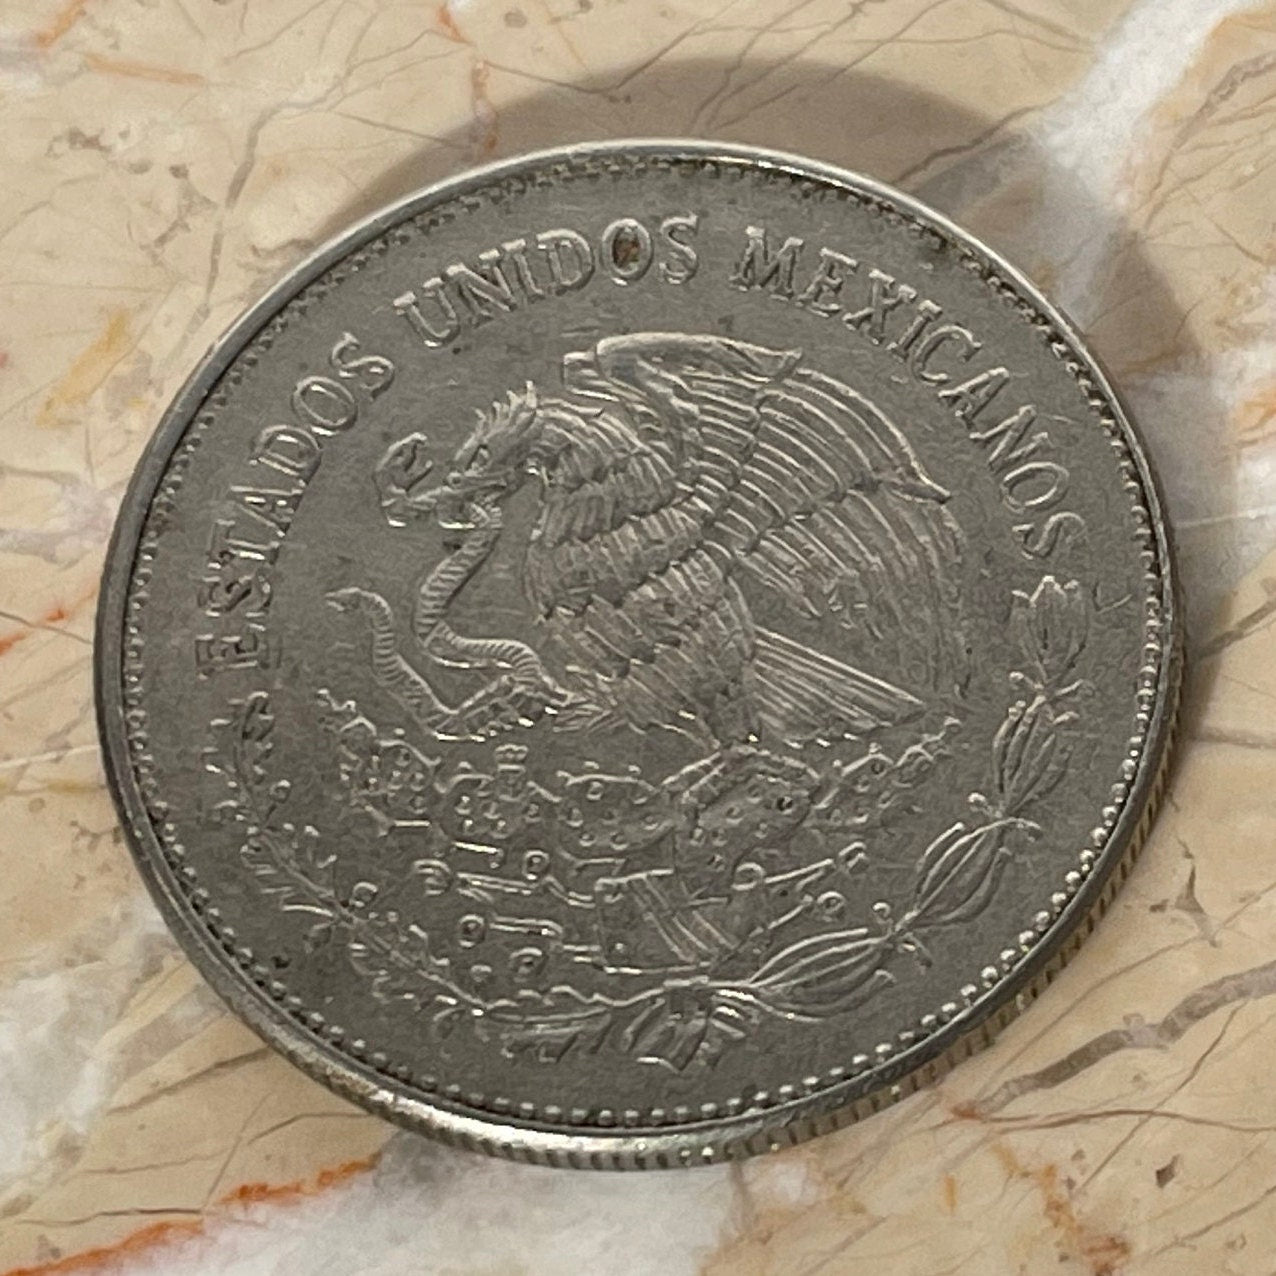 Moon Goddess & Eagle w/Snake 50 Pesos Mexico Authentic Large Coin Money for Jewelry and Craft Making